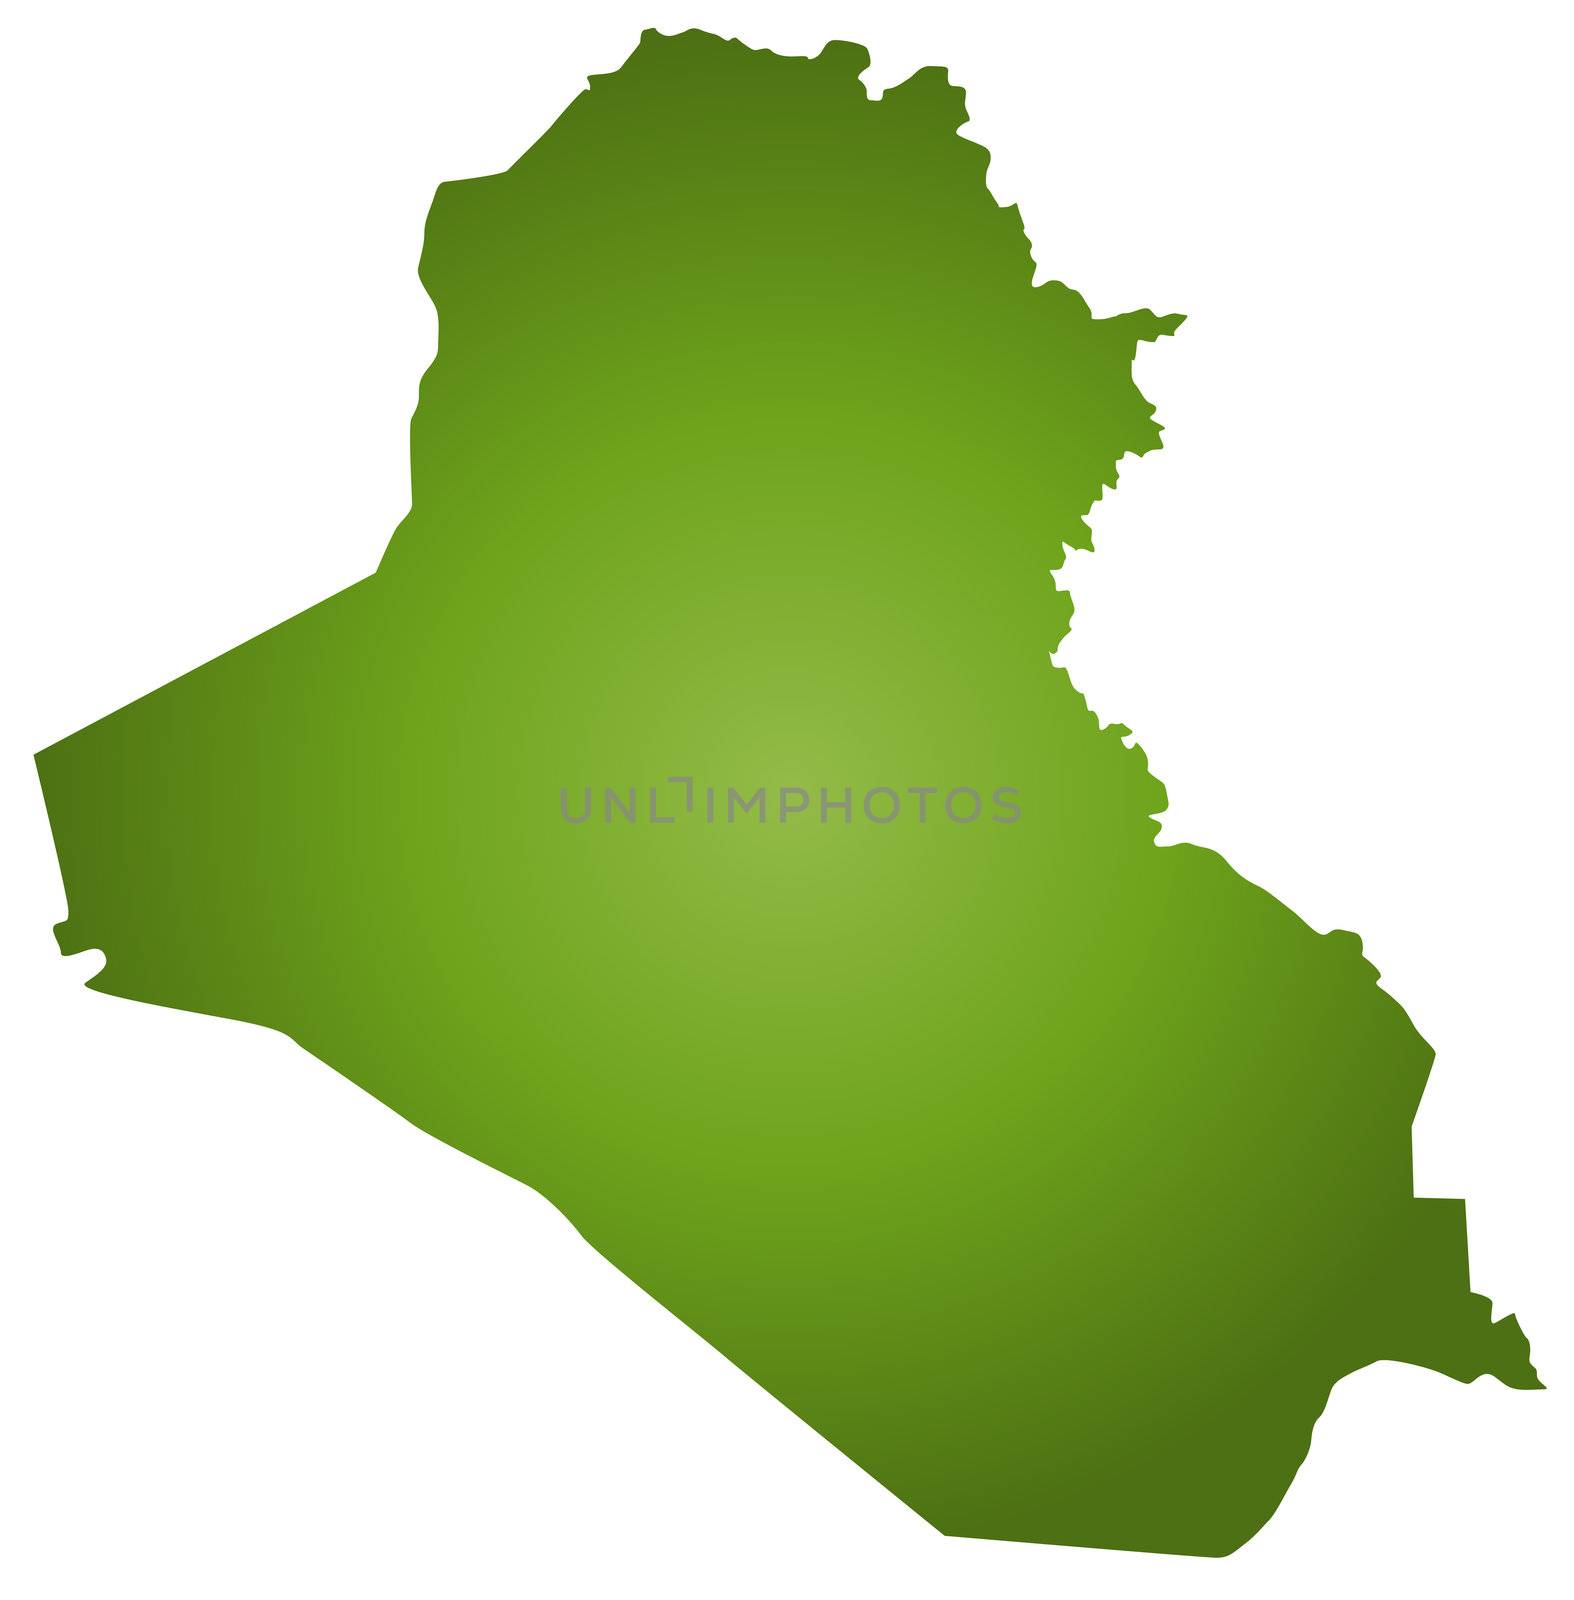 A stylized map of Iraq in green tone. All isolated on white background.